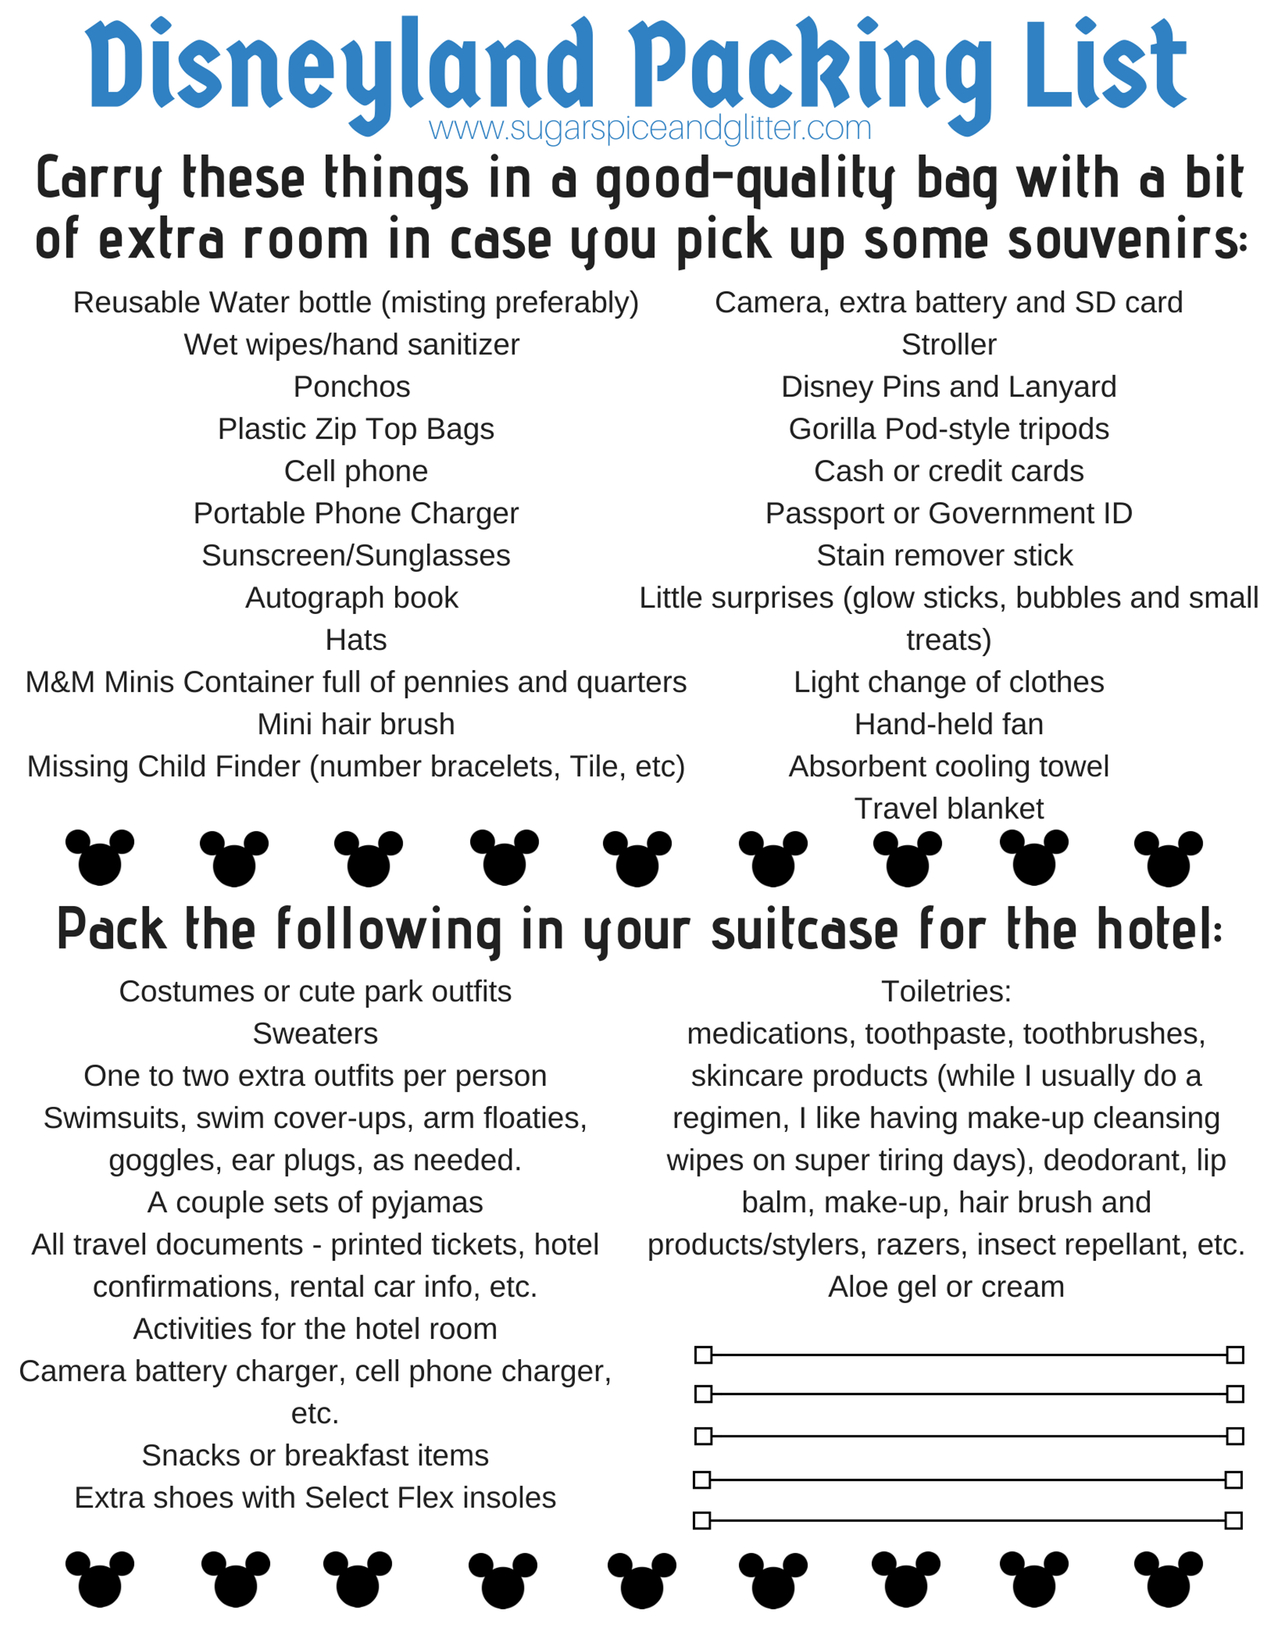 Grab our printable Disneyland packing list for your future Disney vacation planning. 37 must-pack items to avoid overpacking or being underprepared